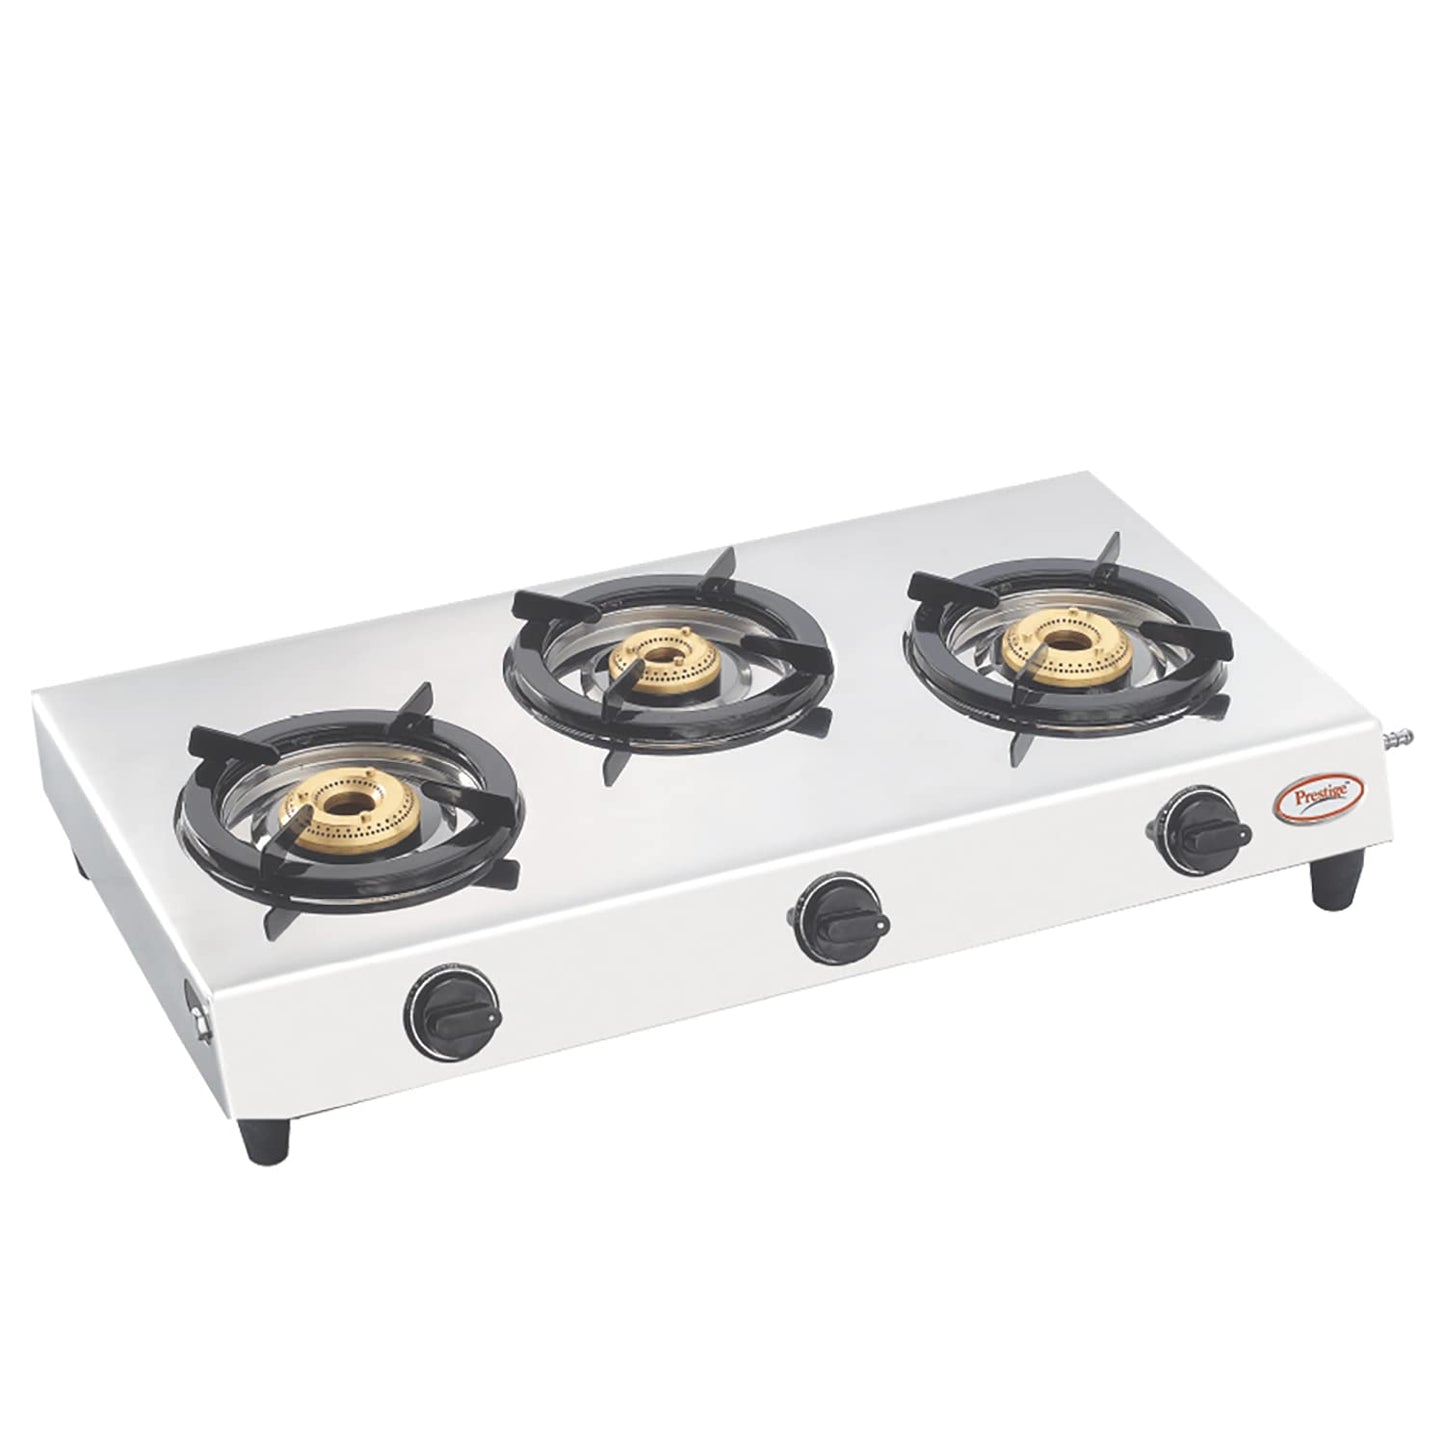 Prestige Perfect Stainless Steel Gas Stove, 3 Burner